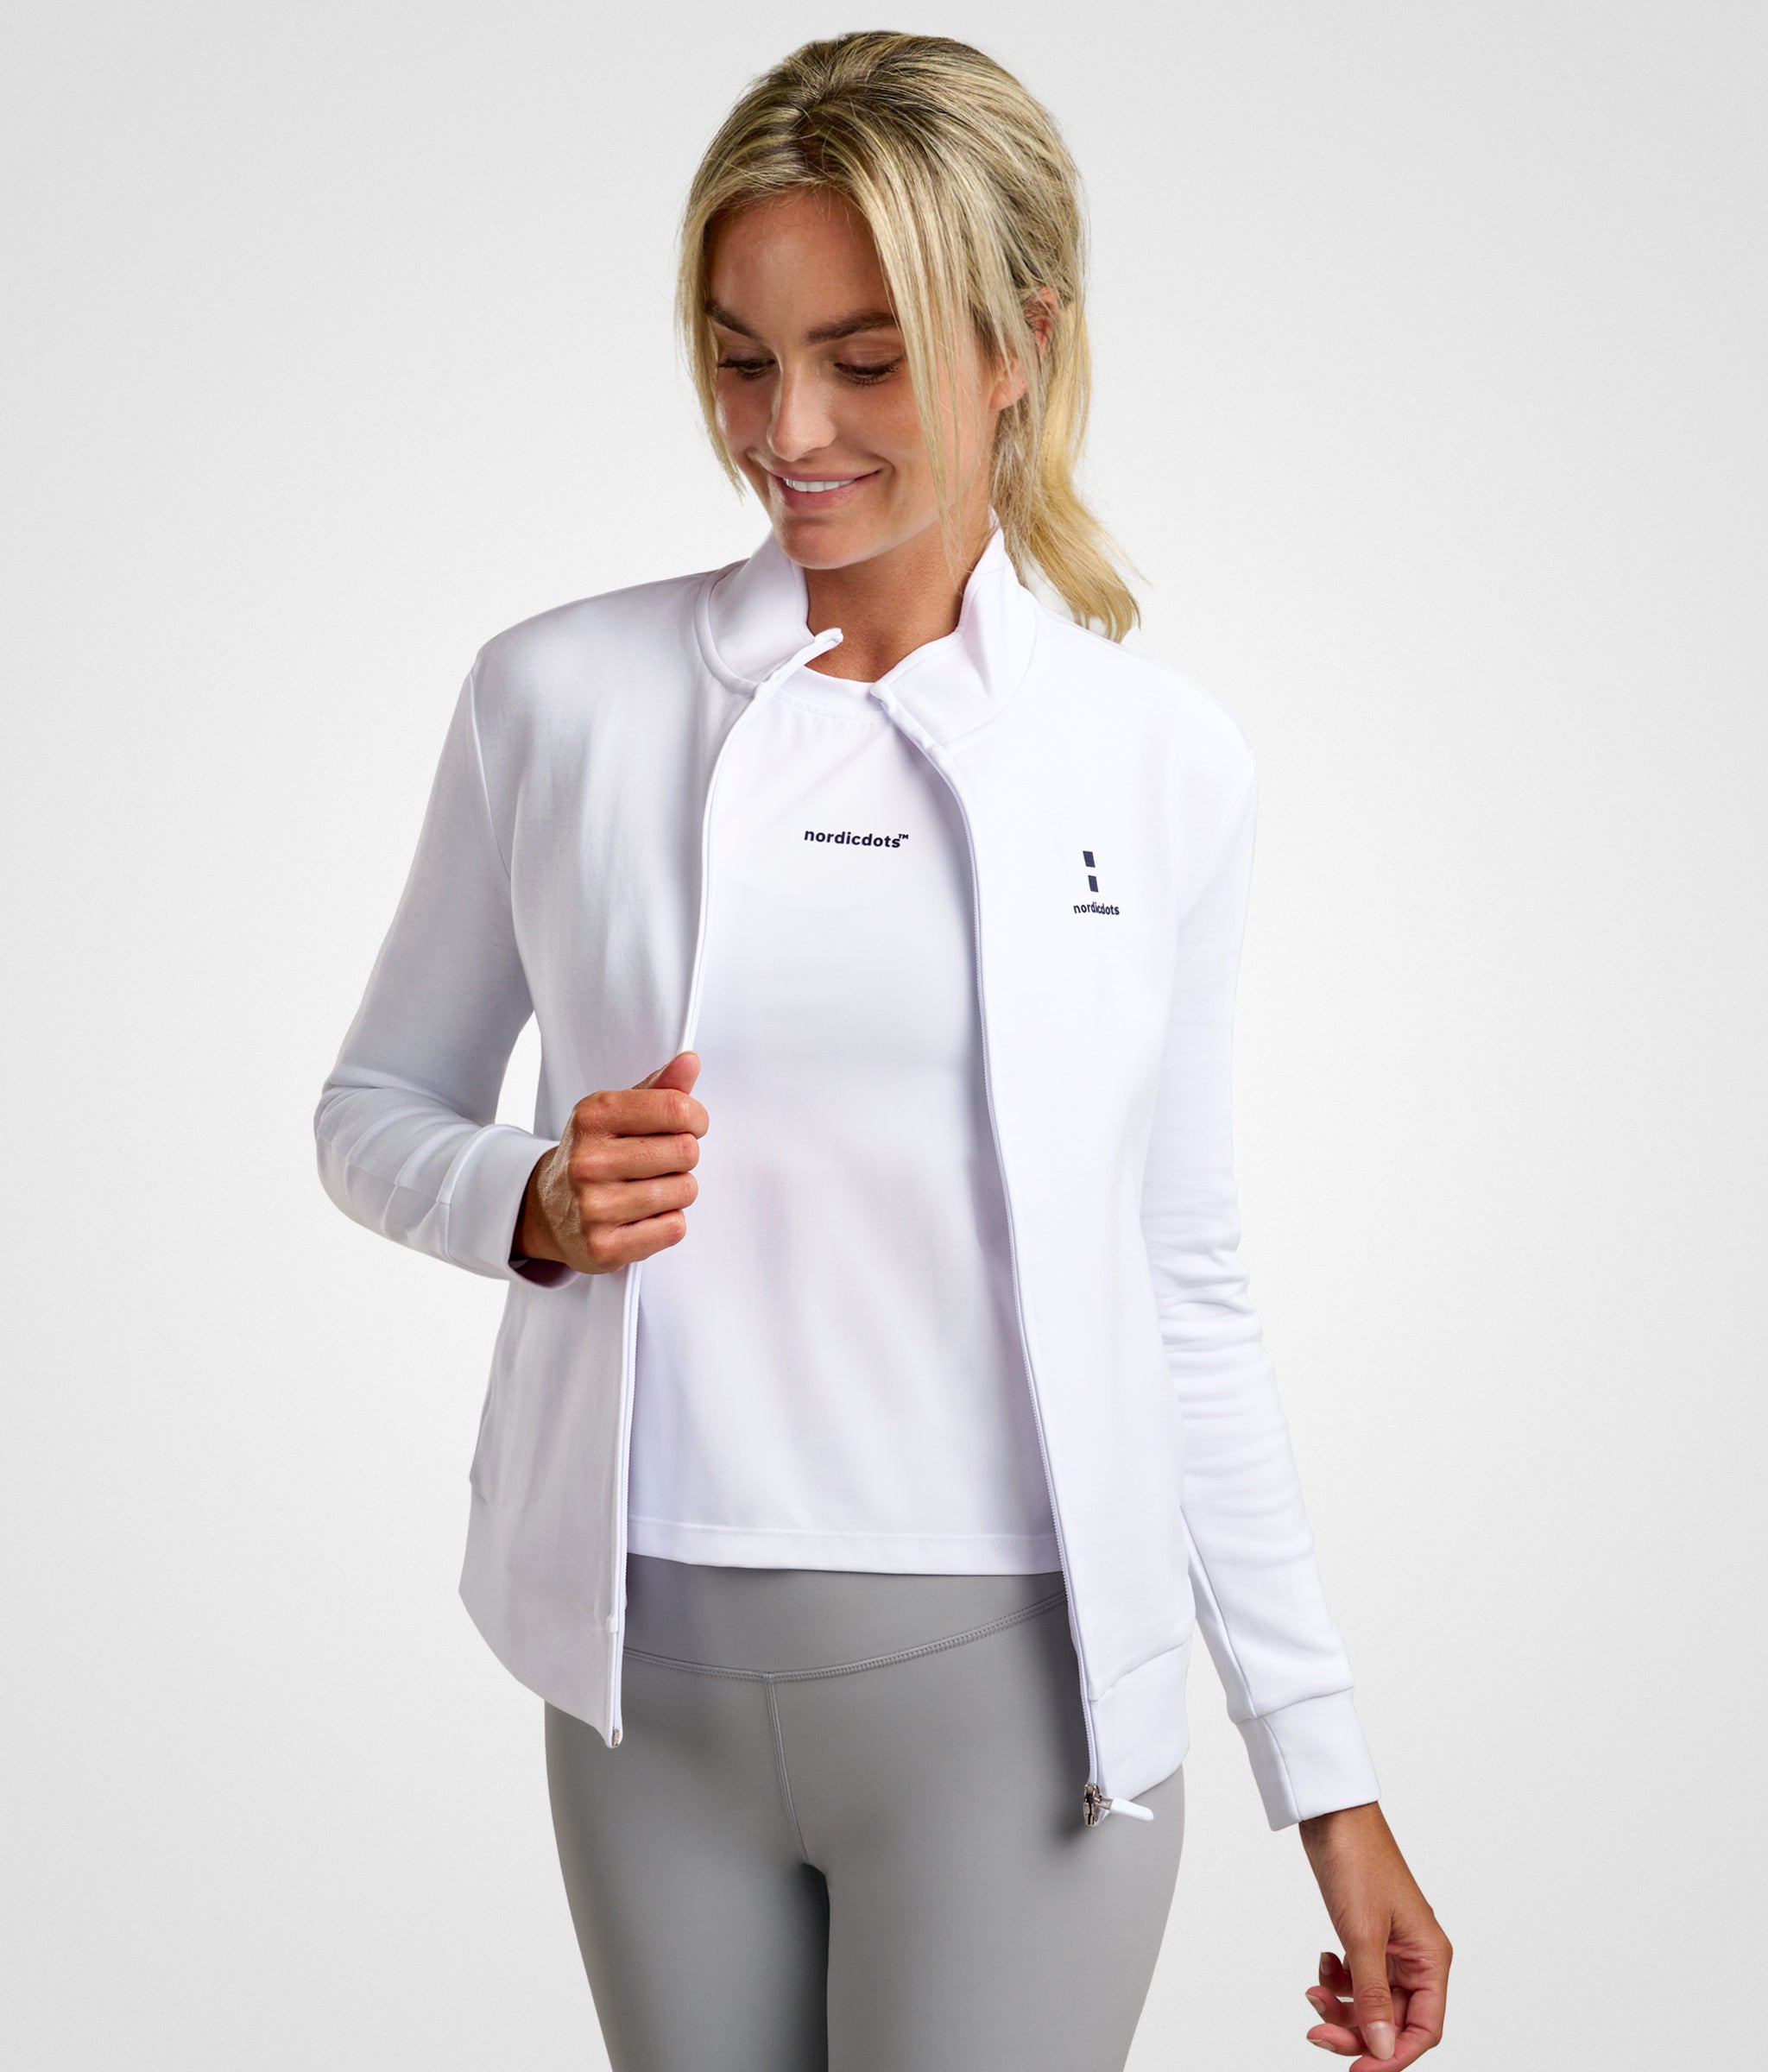 nordicdots women's white jacket tennis padel fitness everyday outfit nordicdots.com